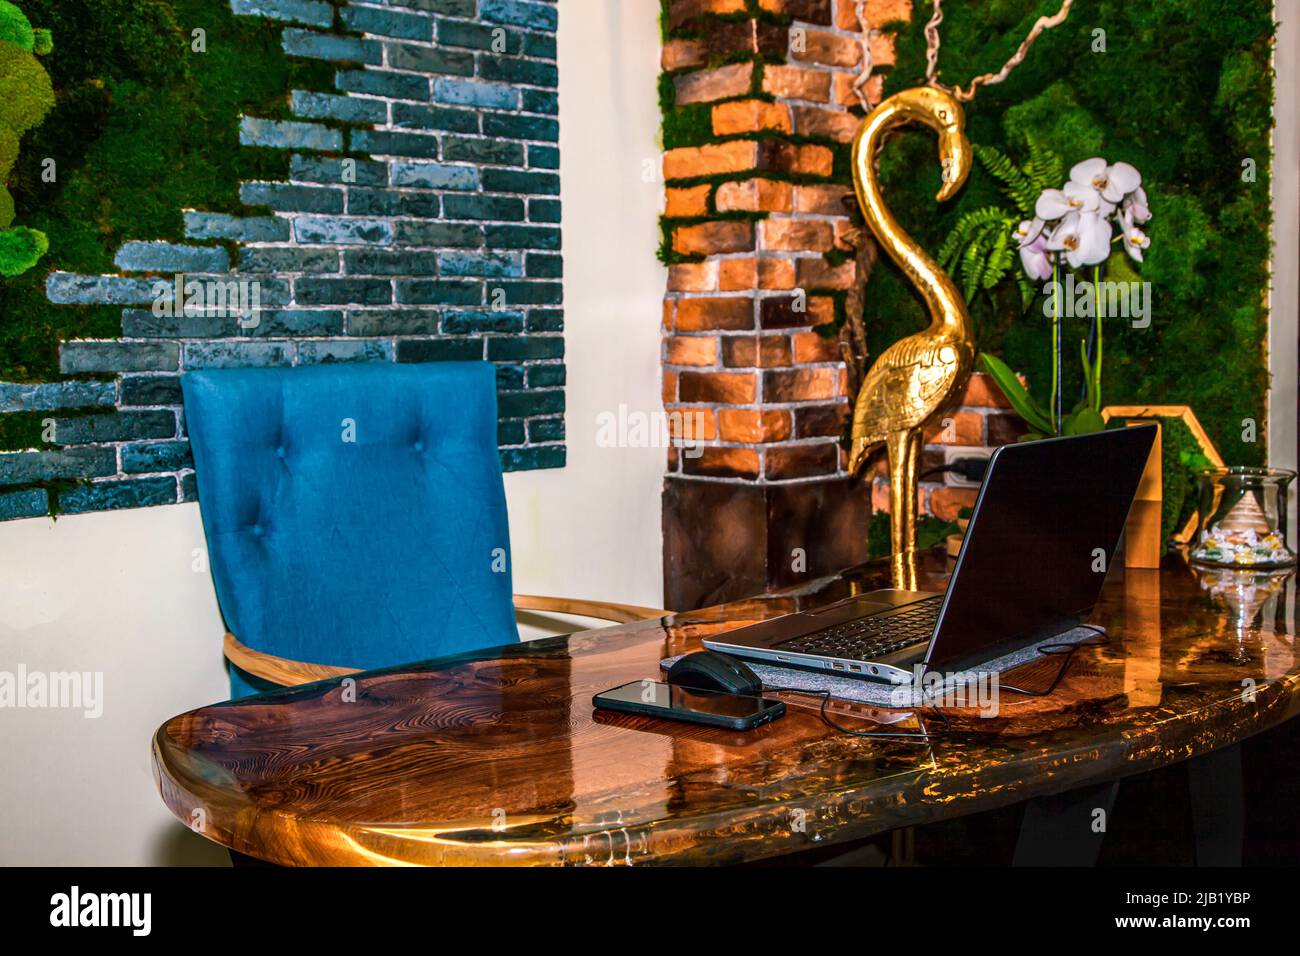 The workplace of an interior designer. Epoxy resin table, brick wall decorated with stabilized moss, laptop, smartphone. Stock Photo